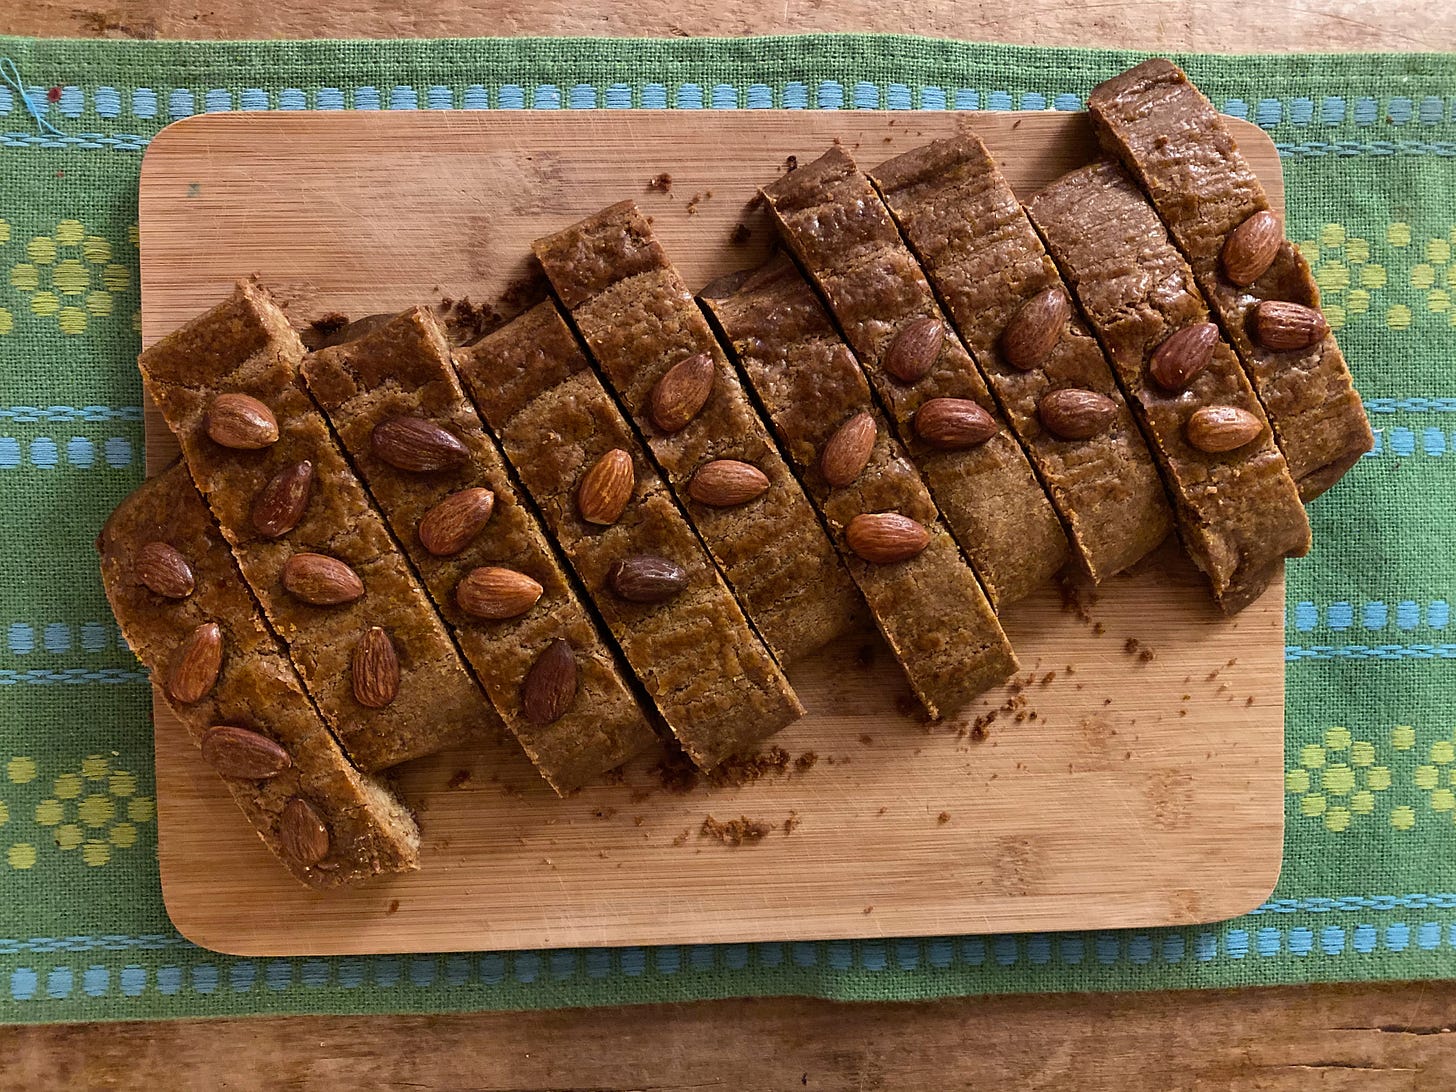 12 golden brown cookies, long oblong strips, sit on a cutting board on top of a green tablecloth. Each cookie has two almonds on top, and they are scrunched up next to each other; they’ve been cut from one large bake into twelve pieces.